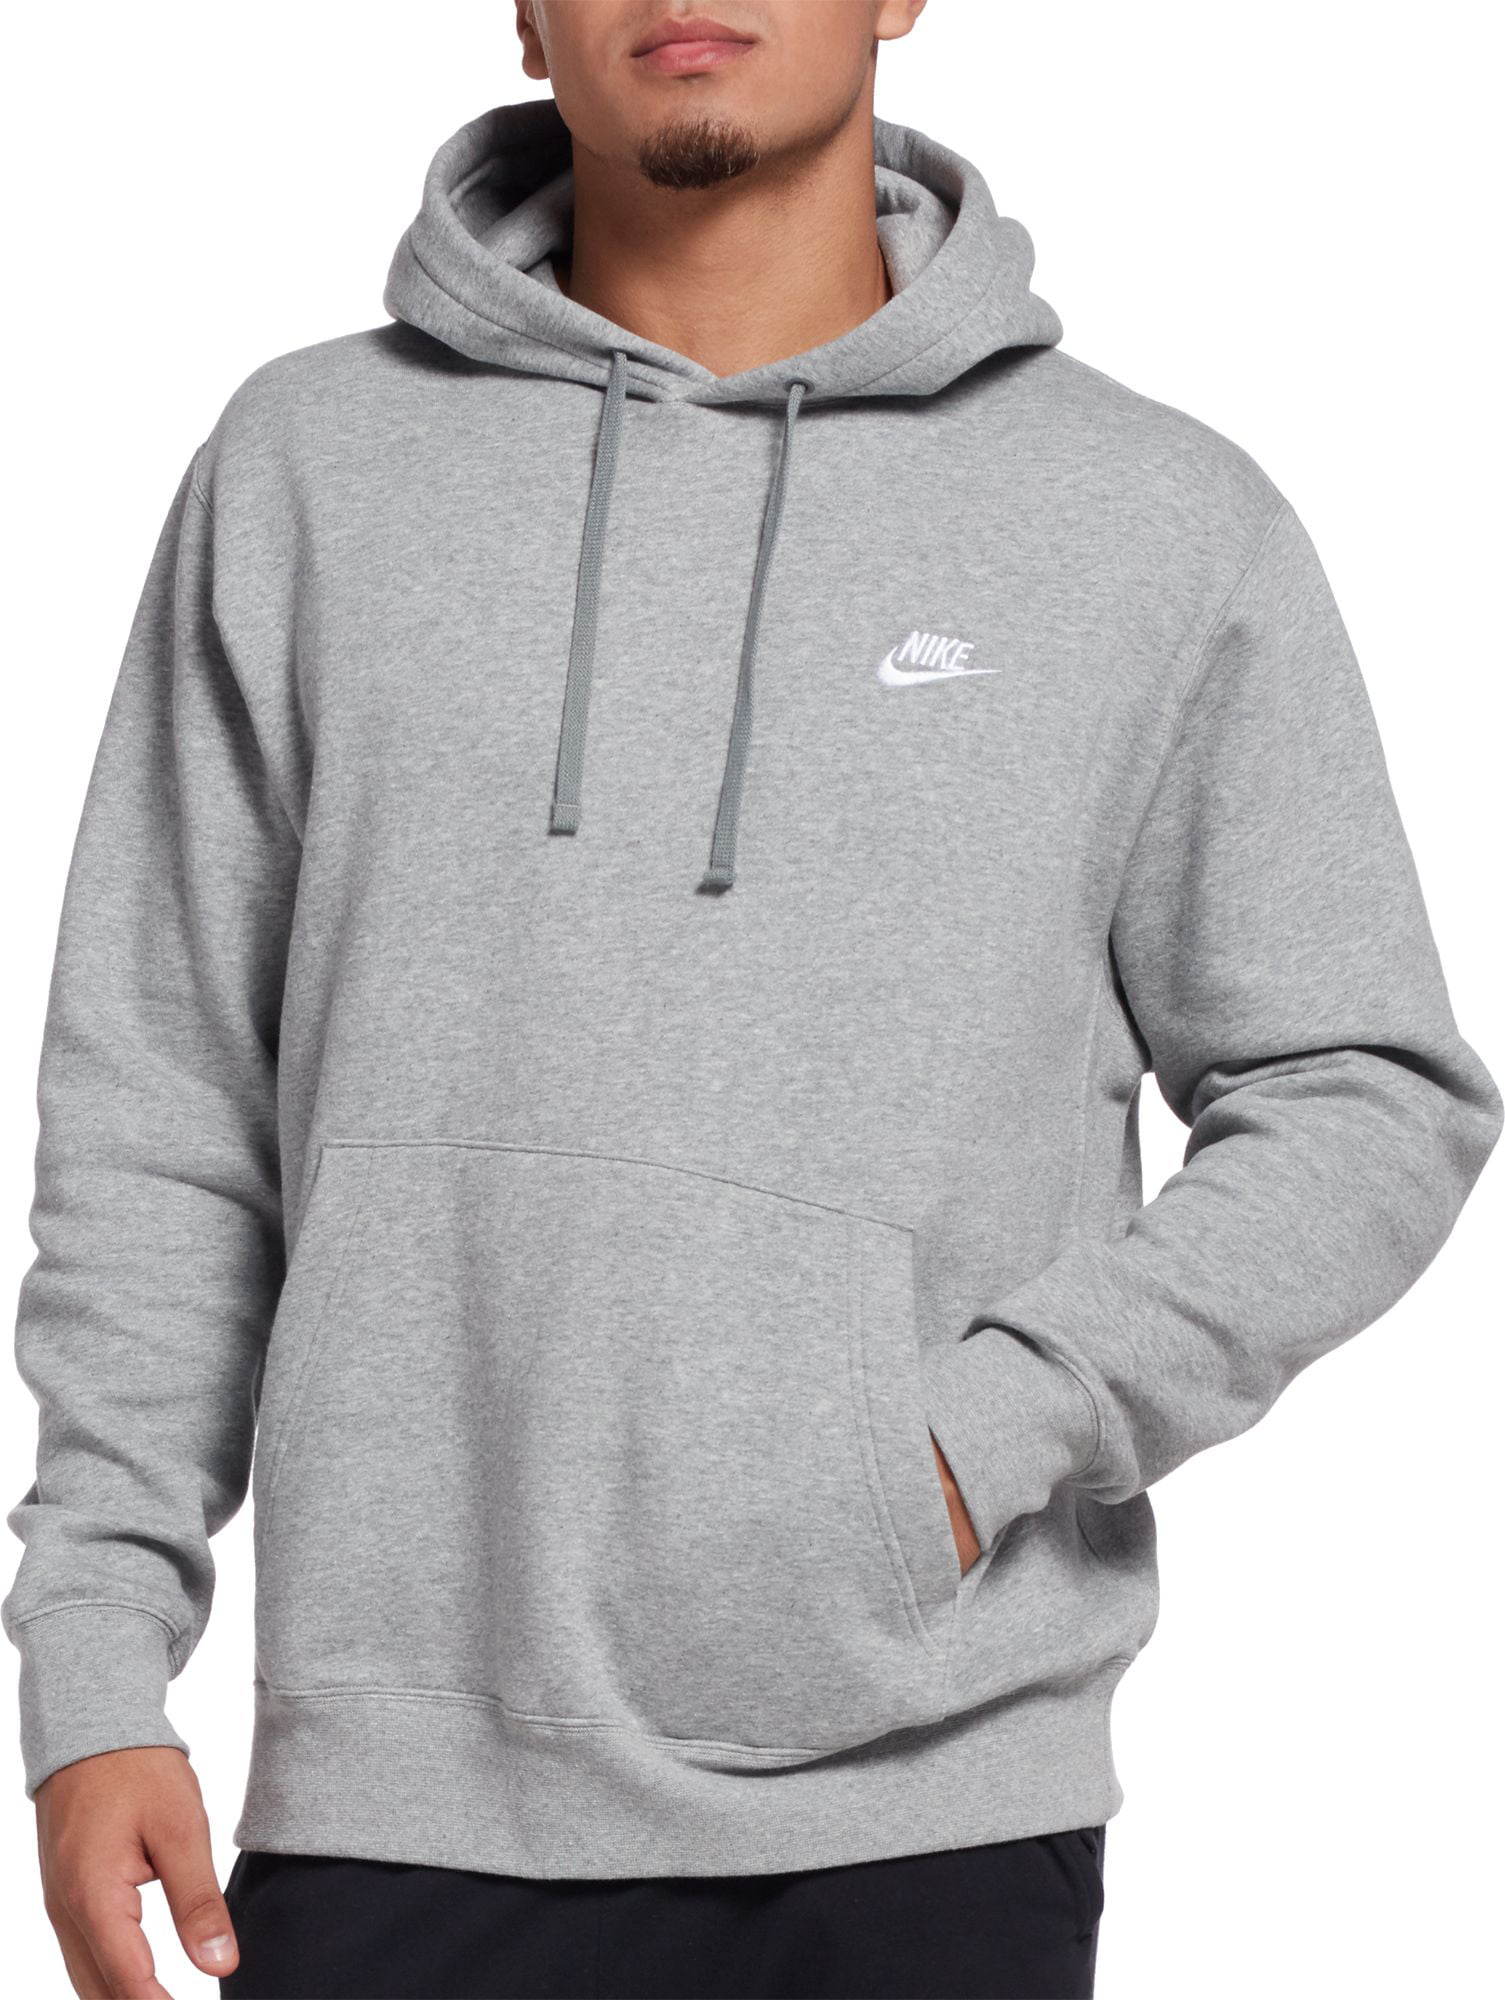 nike pull over